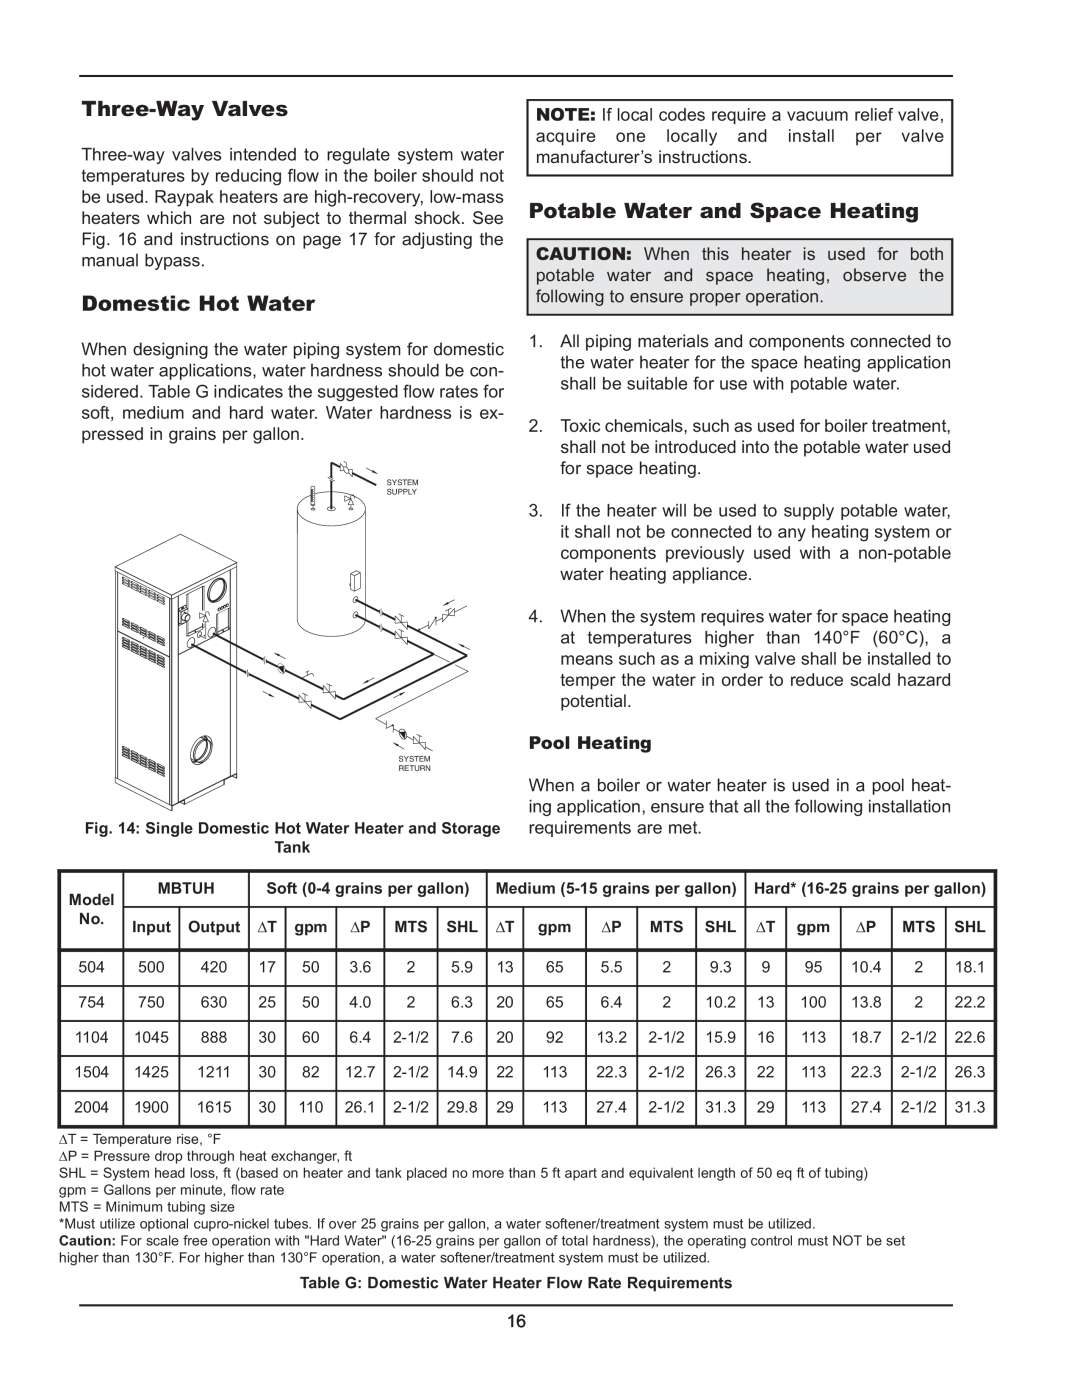 Raypak 5042004 operating instructions Three-WayValves, Domestic Hot Water, Potable Water and Space Heating, Pool Heating 